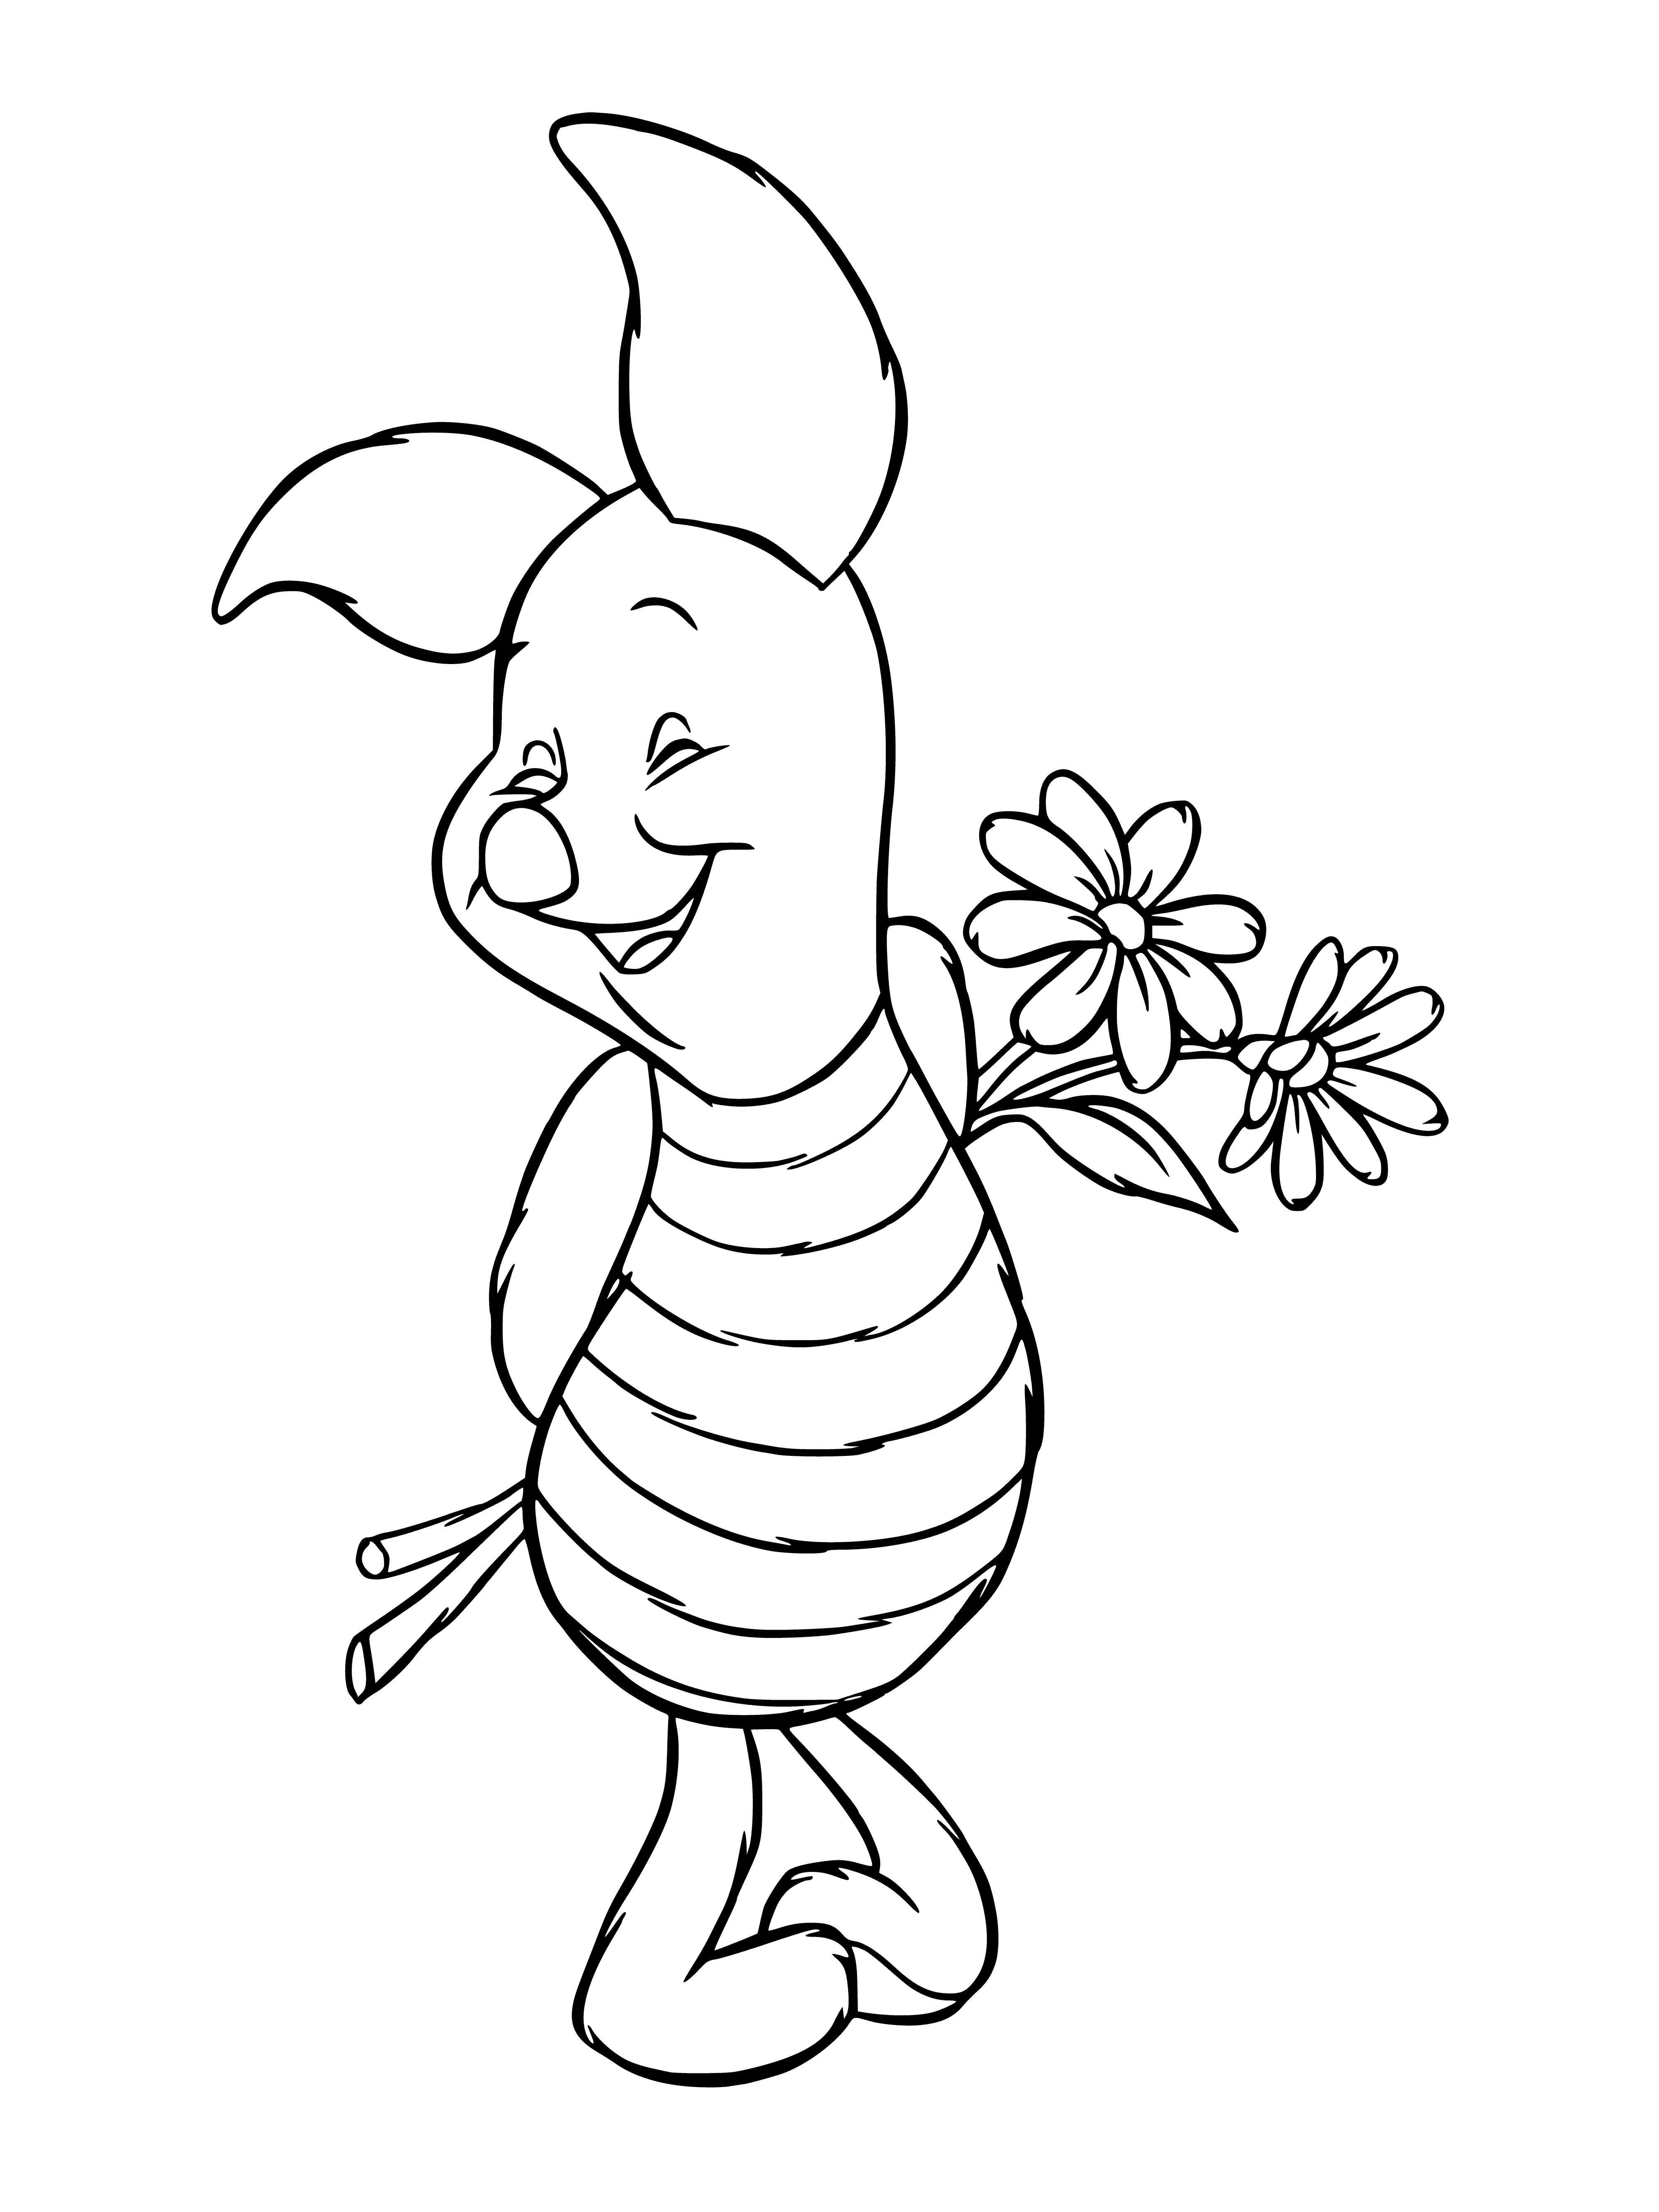 coloring page: Pig sits in grass surrounded by flowers, content & happy.